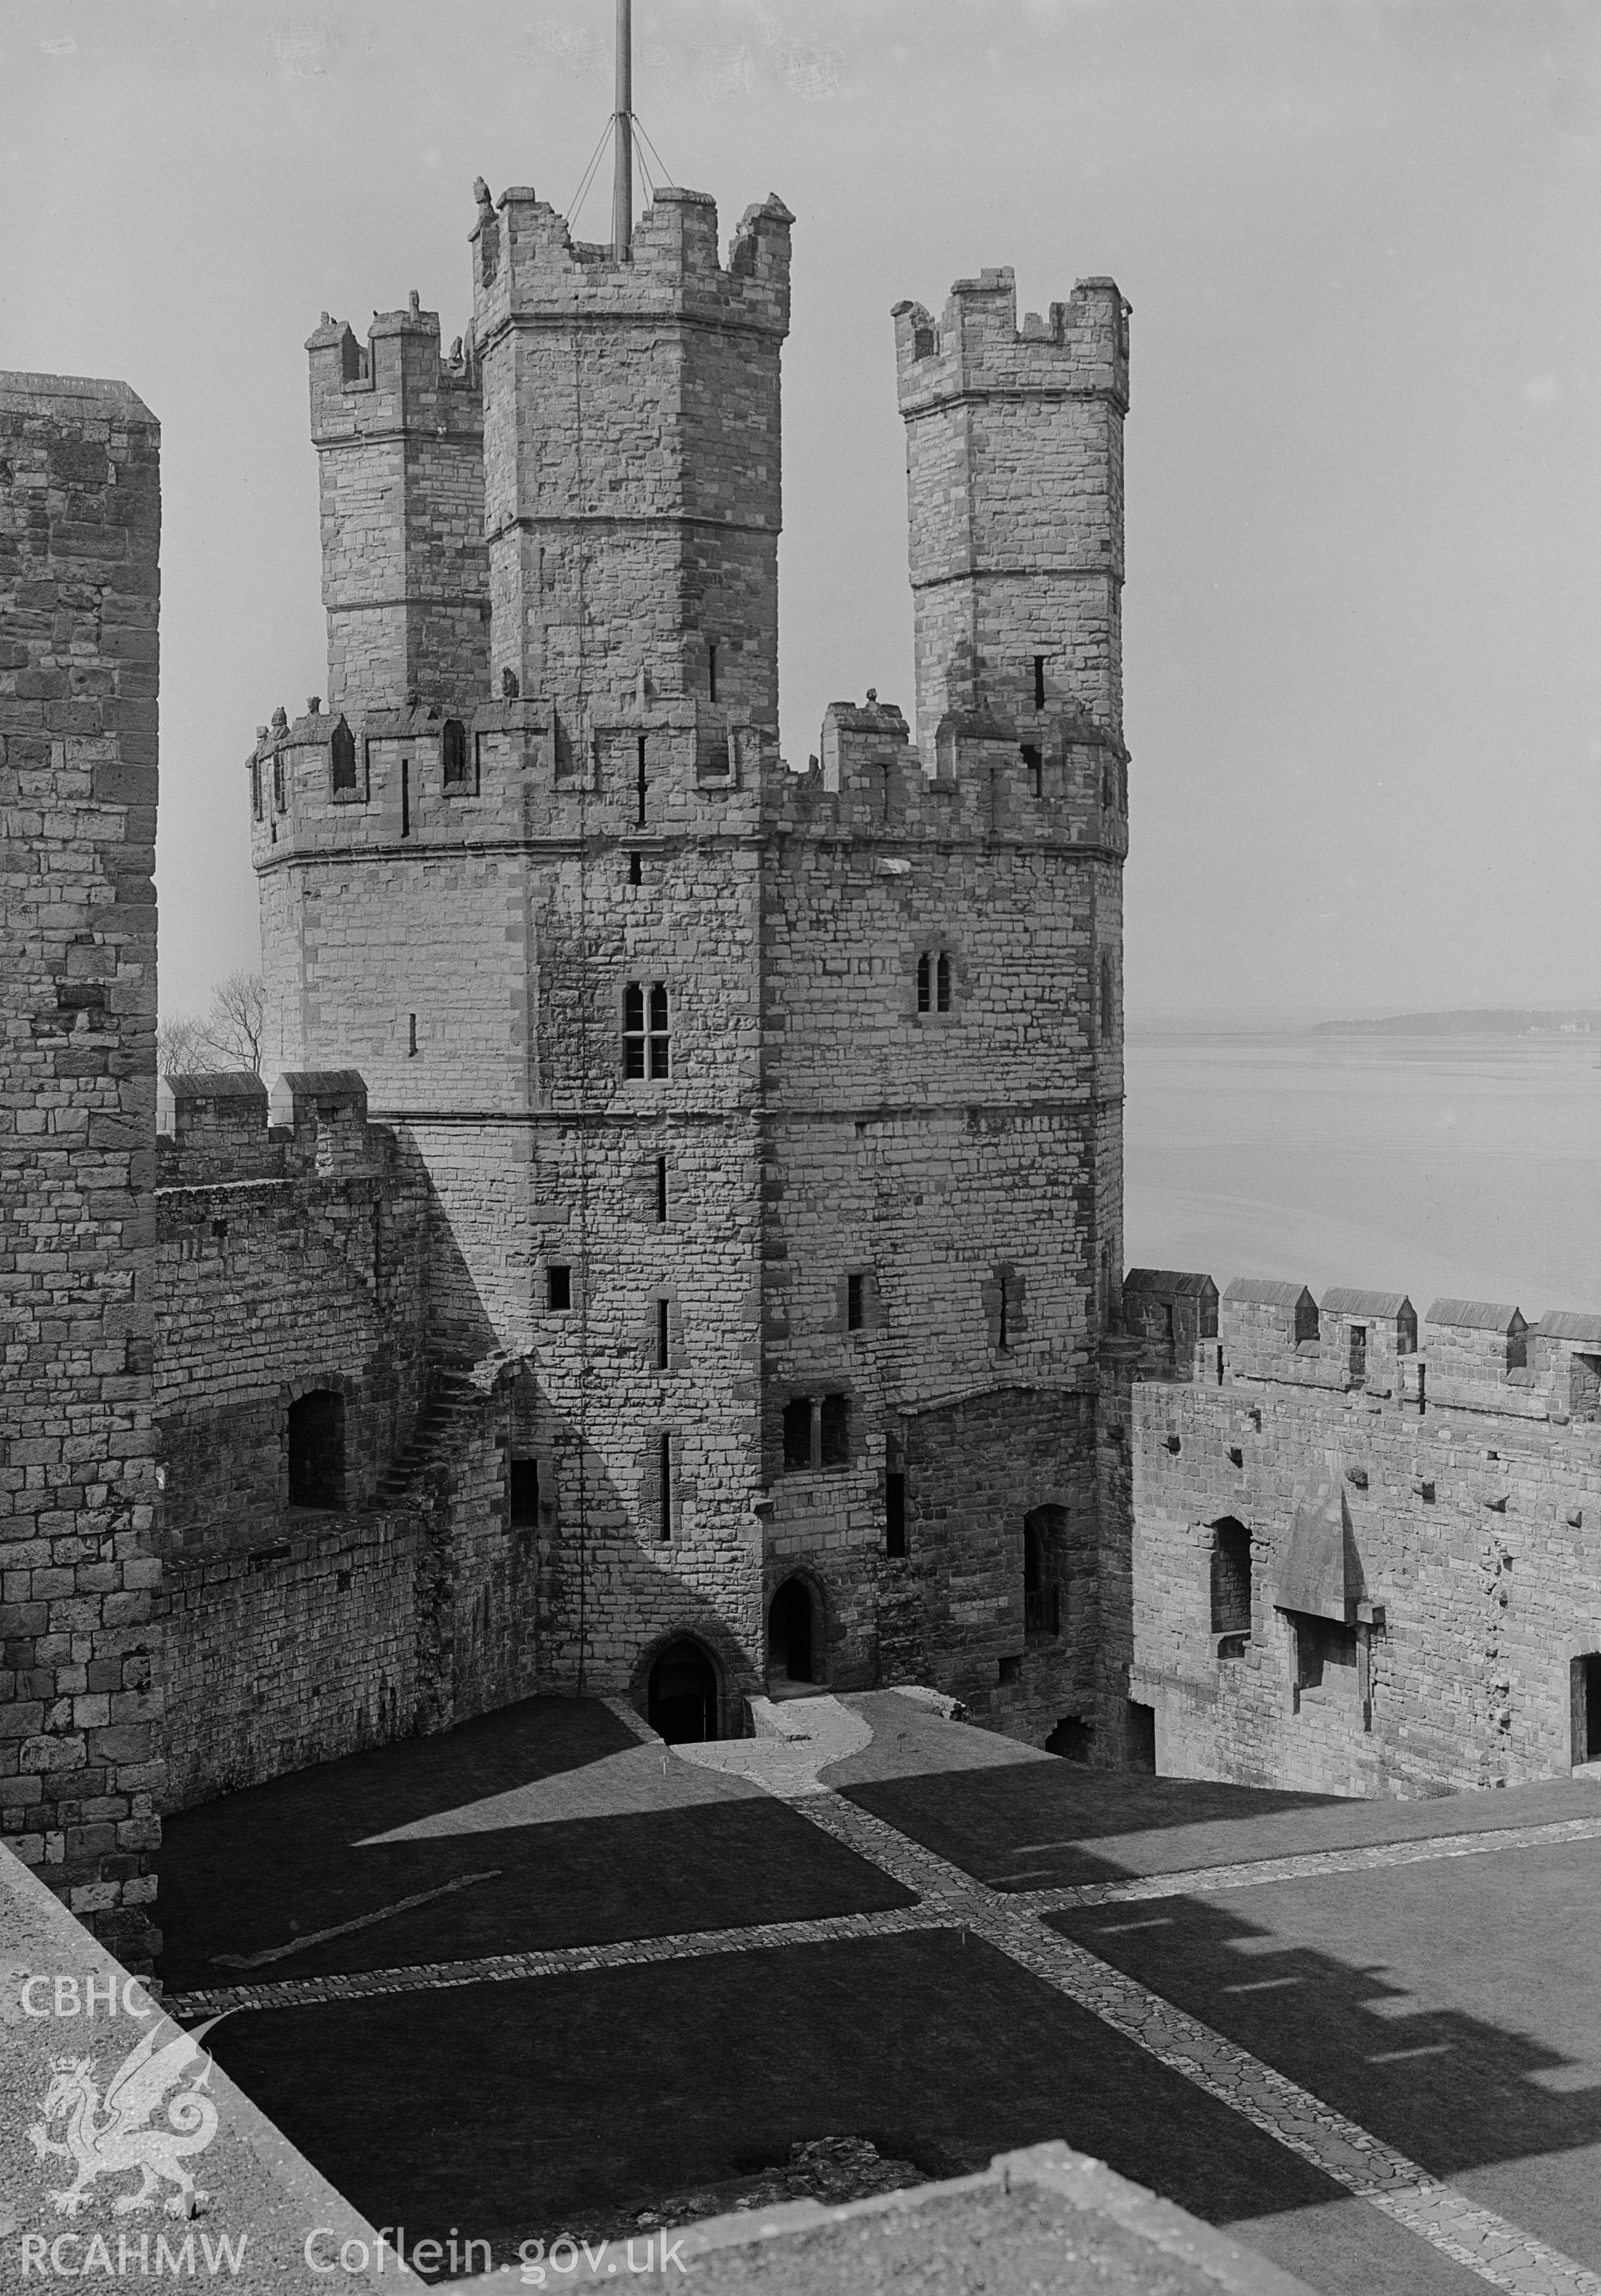 Exterior view of the Eagle Tower at Caernarfon Castle.